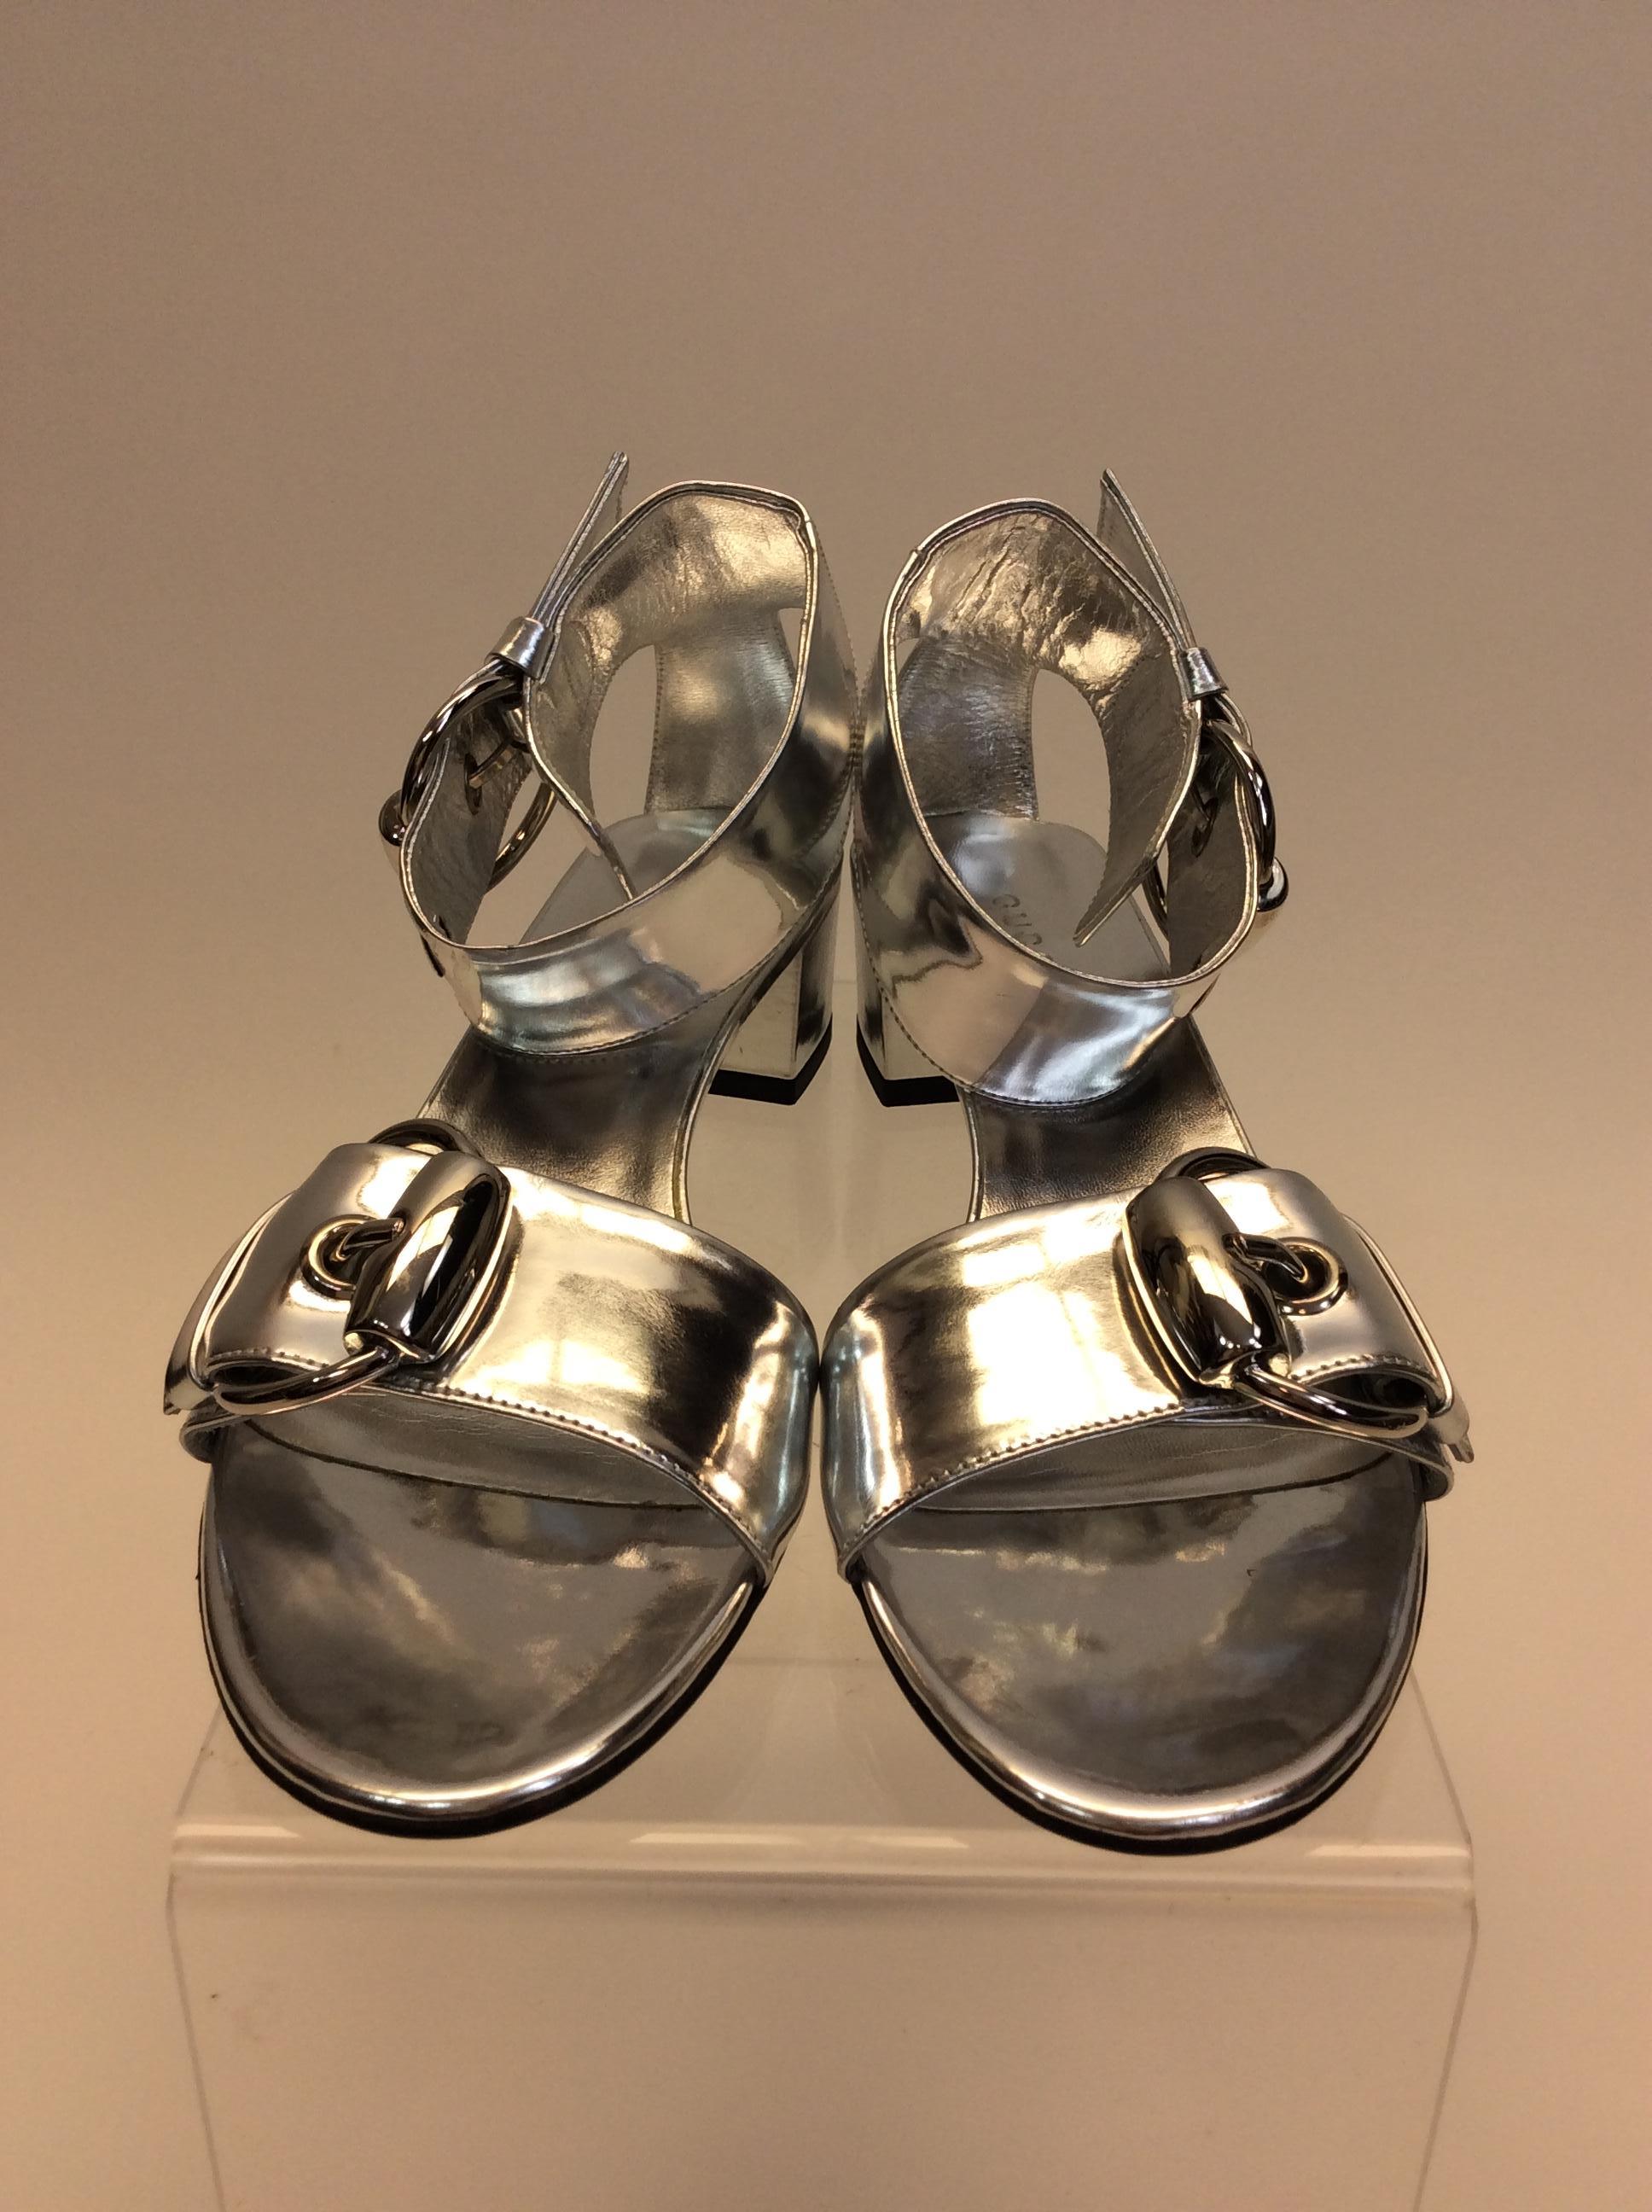 Gucci Silver Leather Sandal NEW
$199
Made in Italy
Size 6
1.5